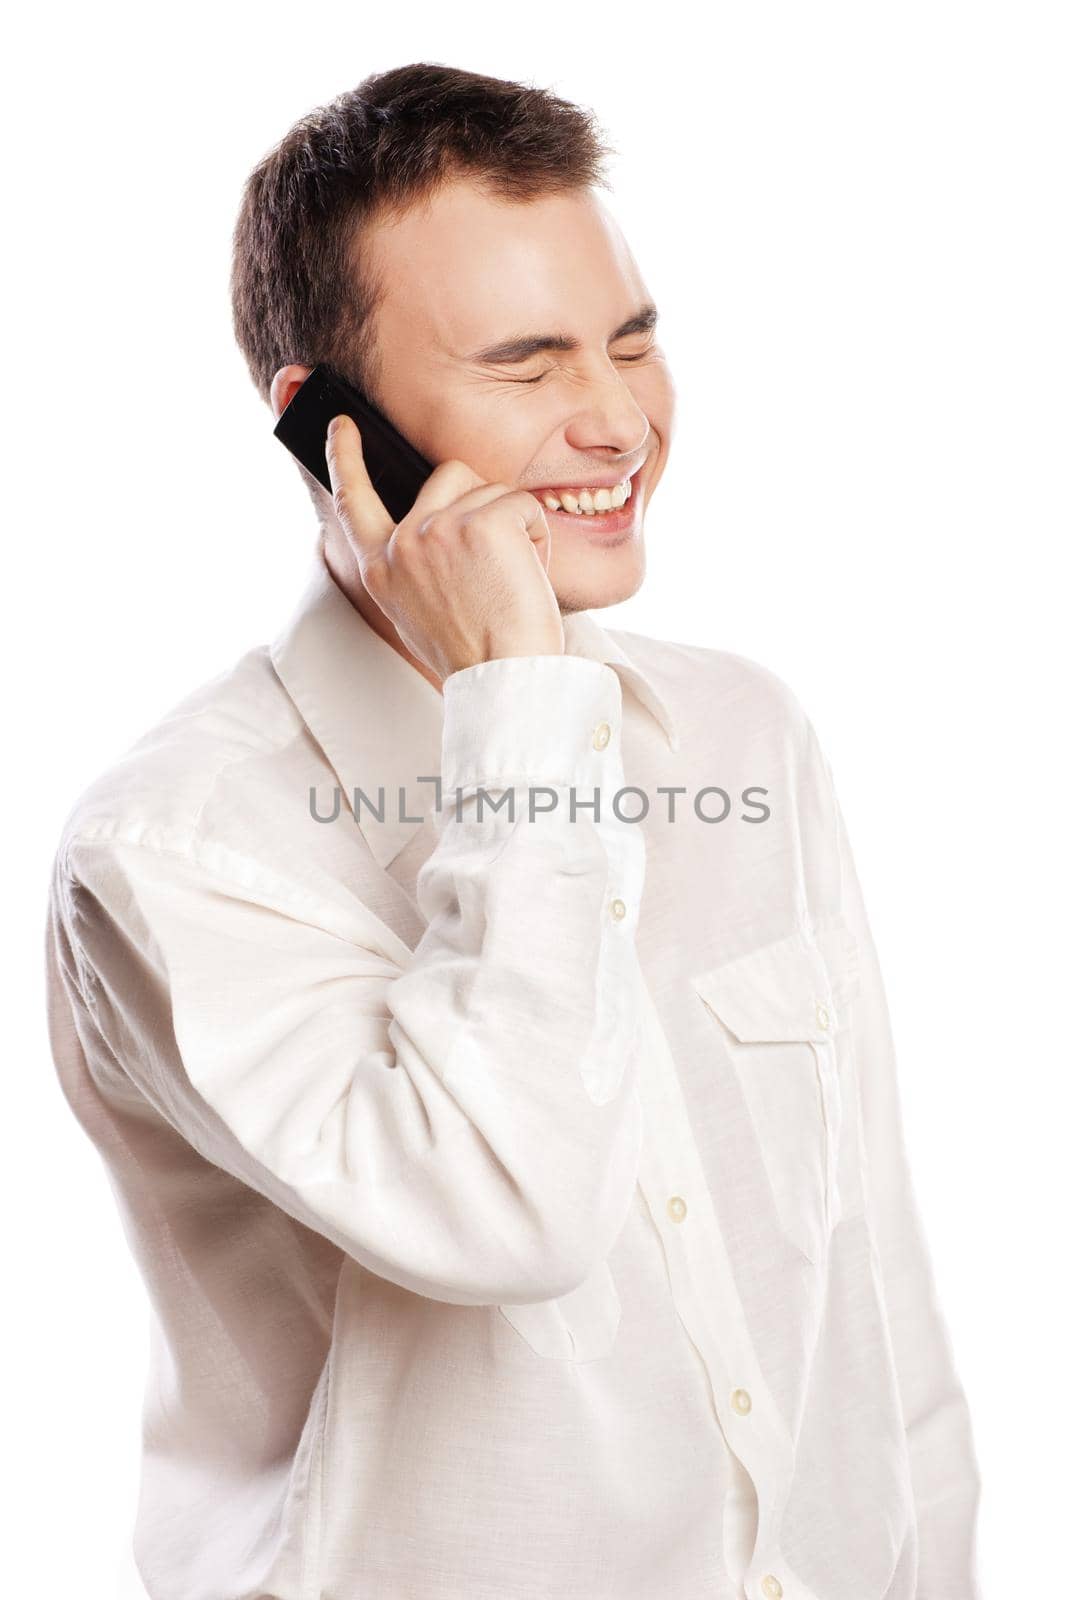 Man smiling and talking on phone isolated by Julenochek